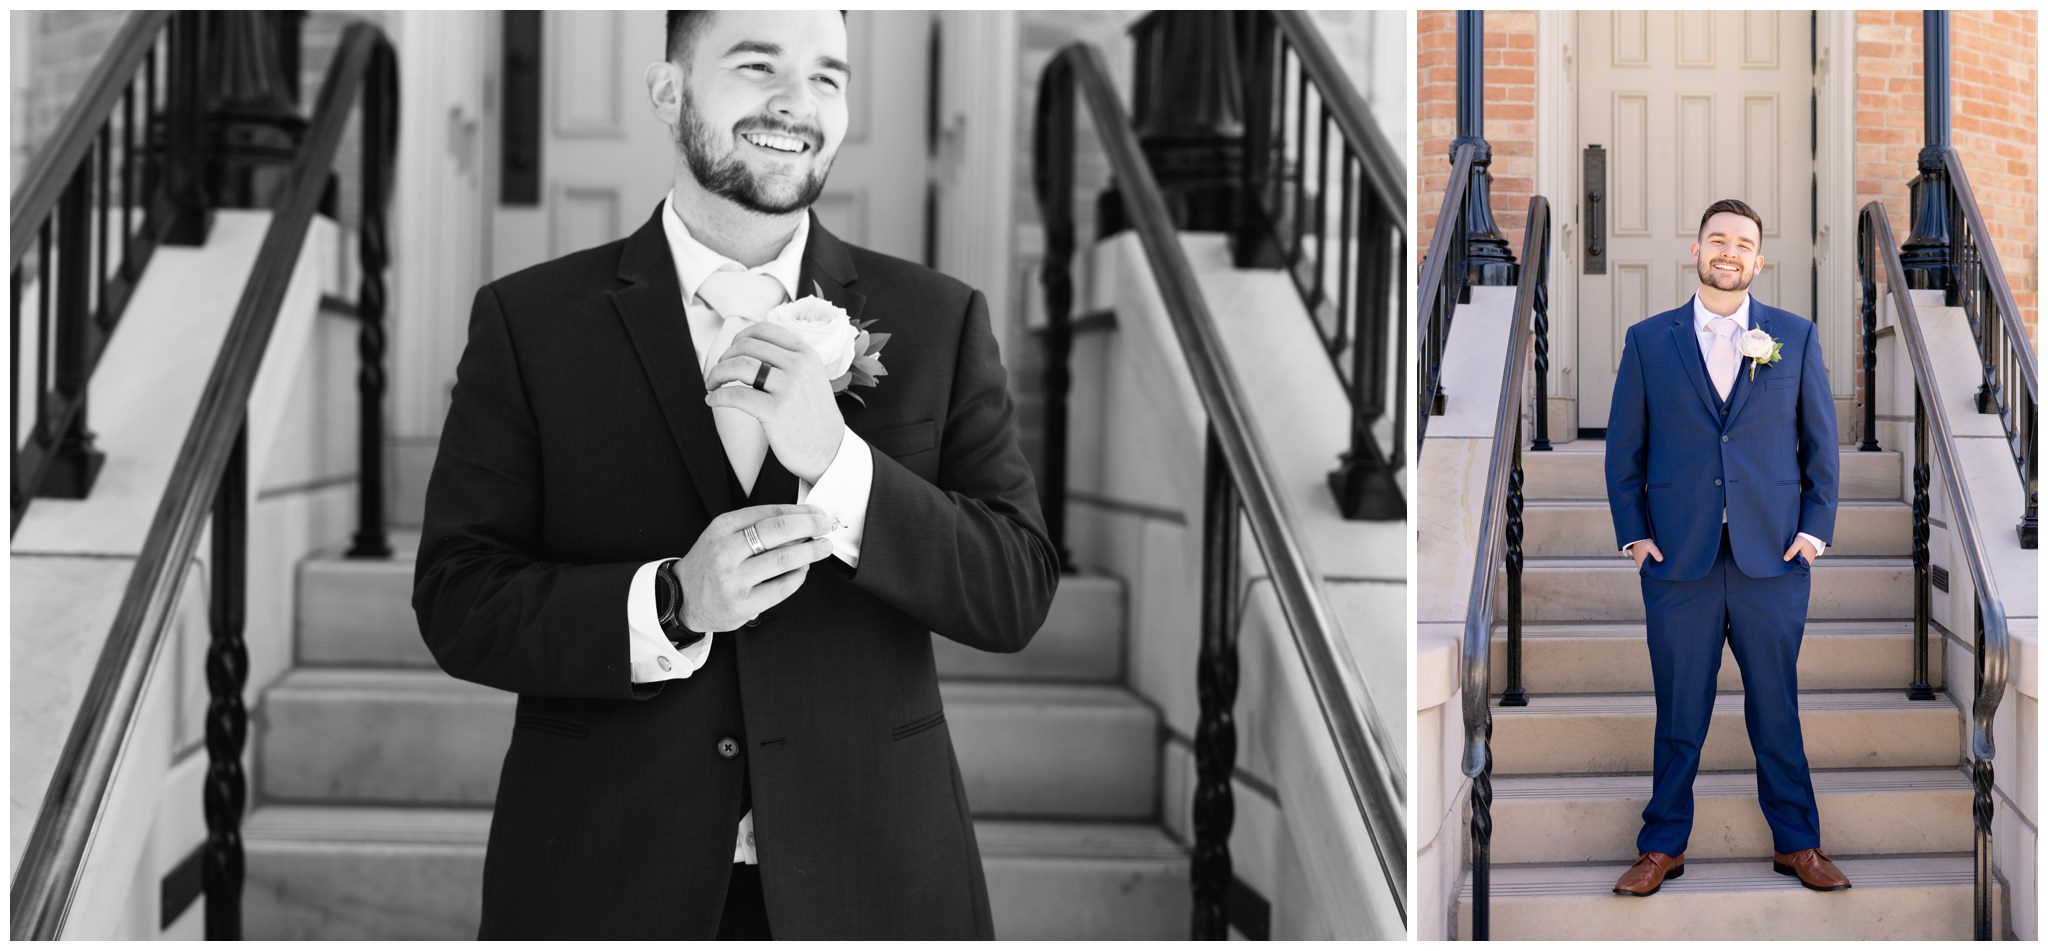 Groom Portraits at the provo temple in utah